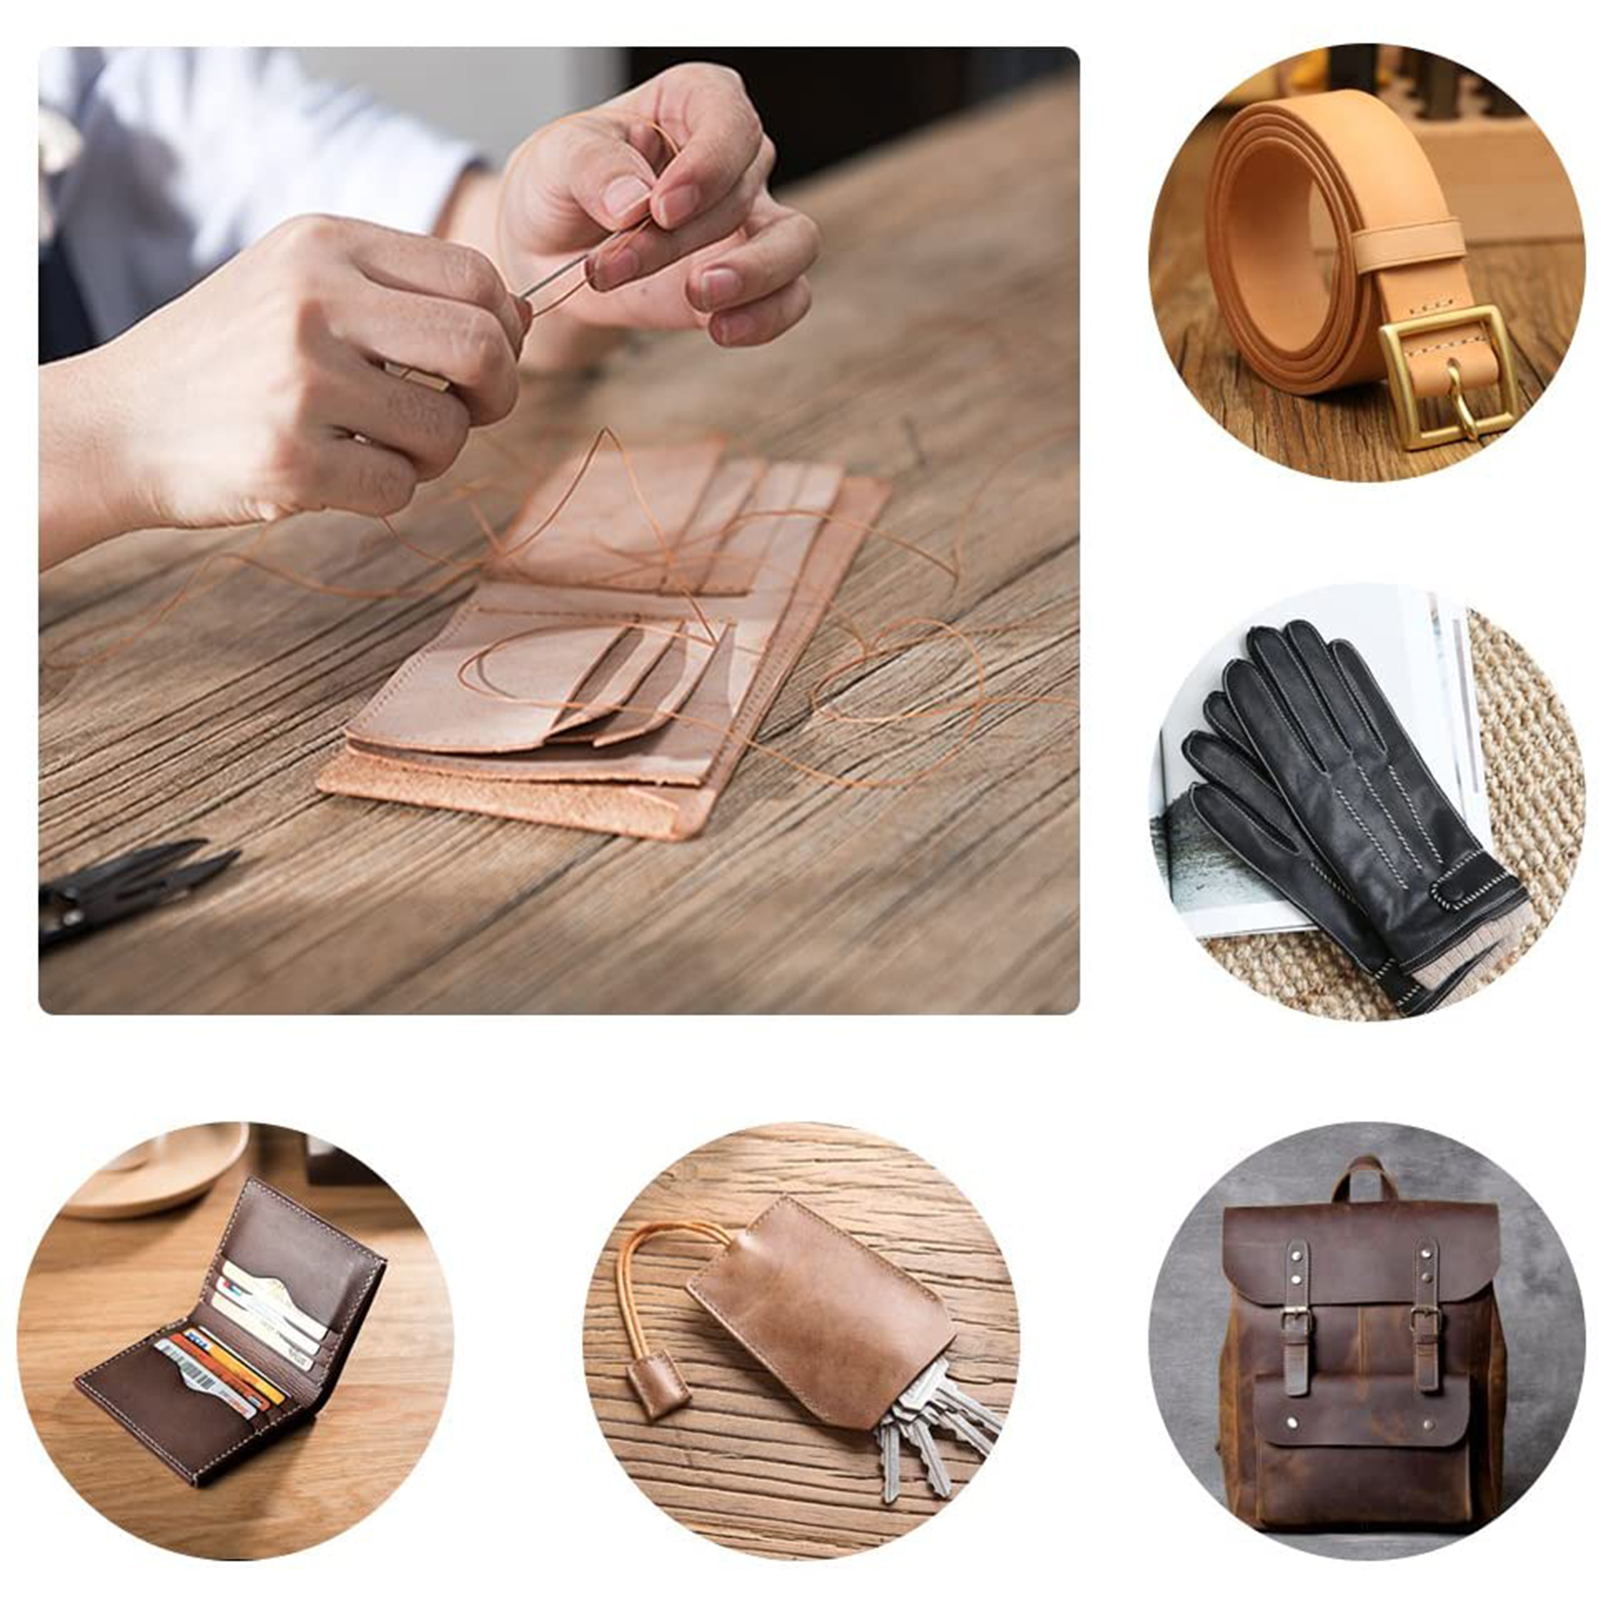 Meterk 31Pcs Leather Sewing Tools Diy Leather Craft Hand Stitching Kit With  Groover Awl Waxed Thimble 